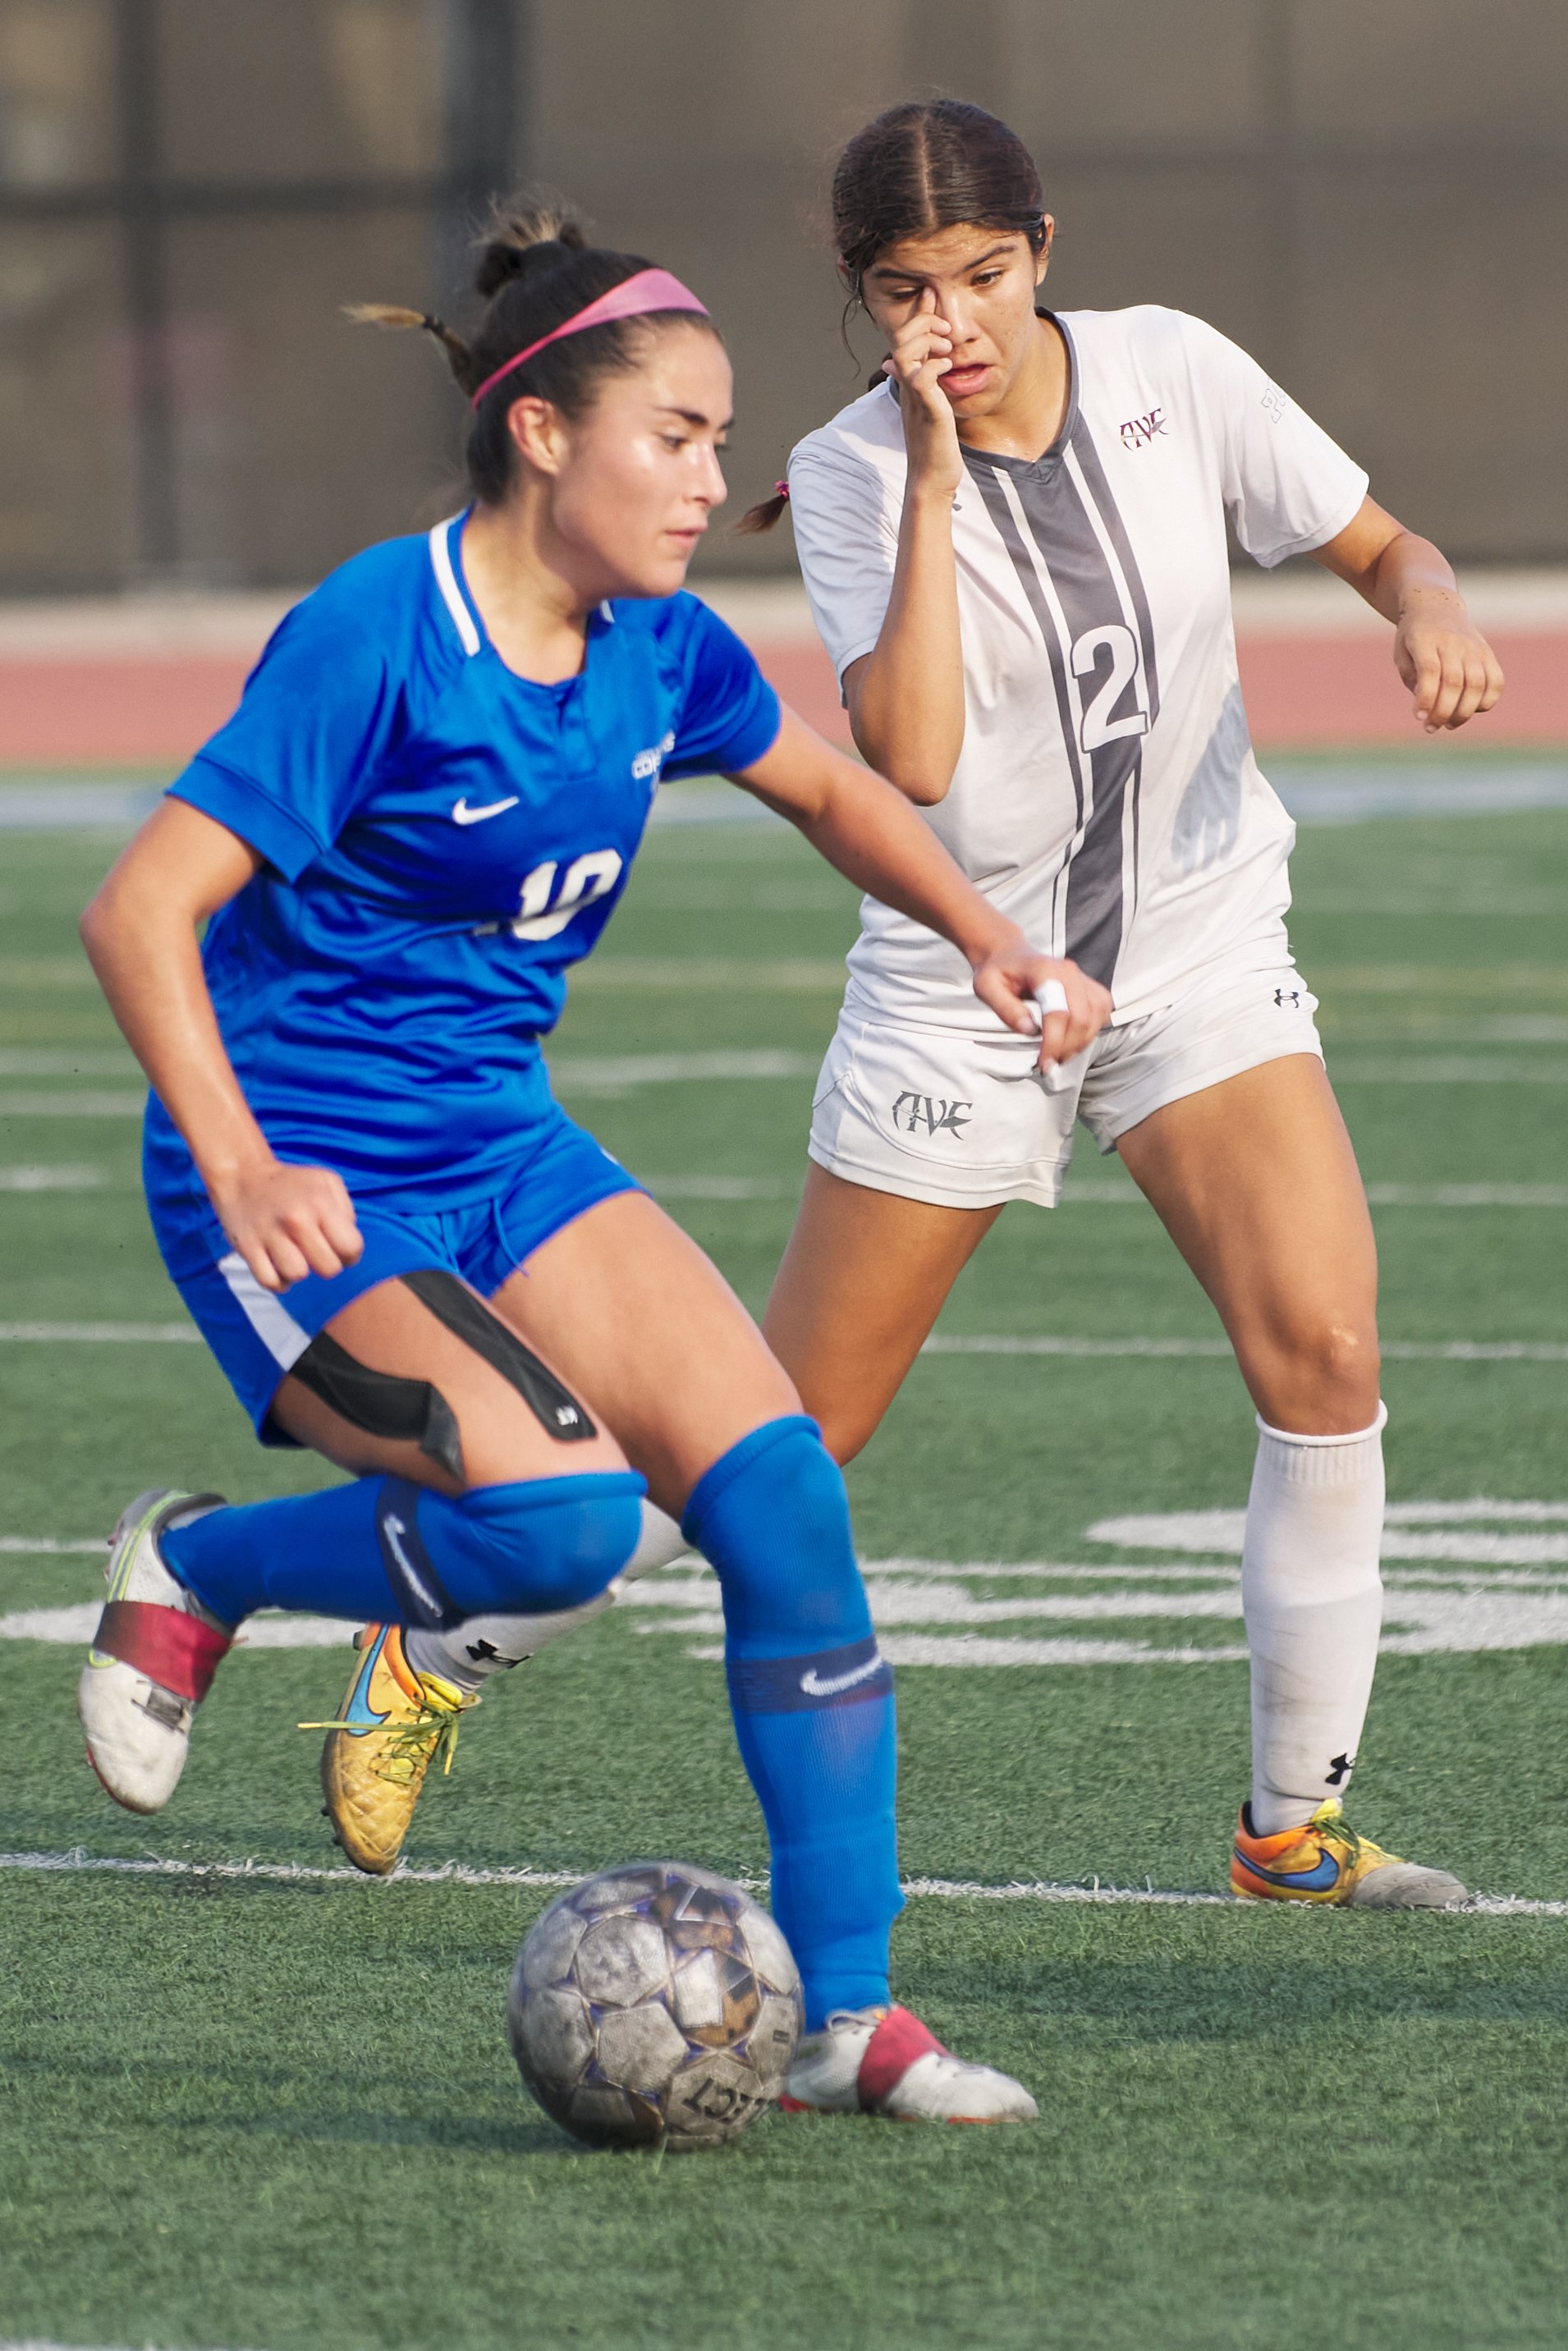  Santa Monica College Corsairs' Ali Alban and Antelope Valley College Marauders' Kaylin Gonzalez during the women's soccer match on Tuesday, Oct. 11, 2022, at Corsair Field in Santa Monica, Calif. The Corsairs lost 6-0. (Nicholas McCall | The Corsair